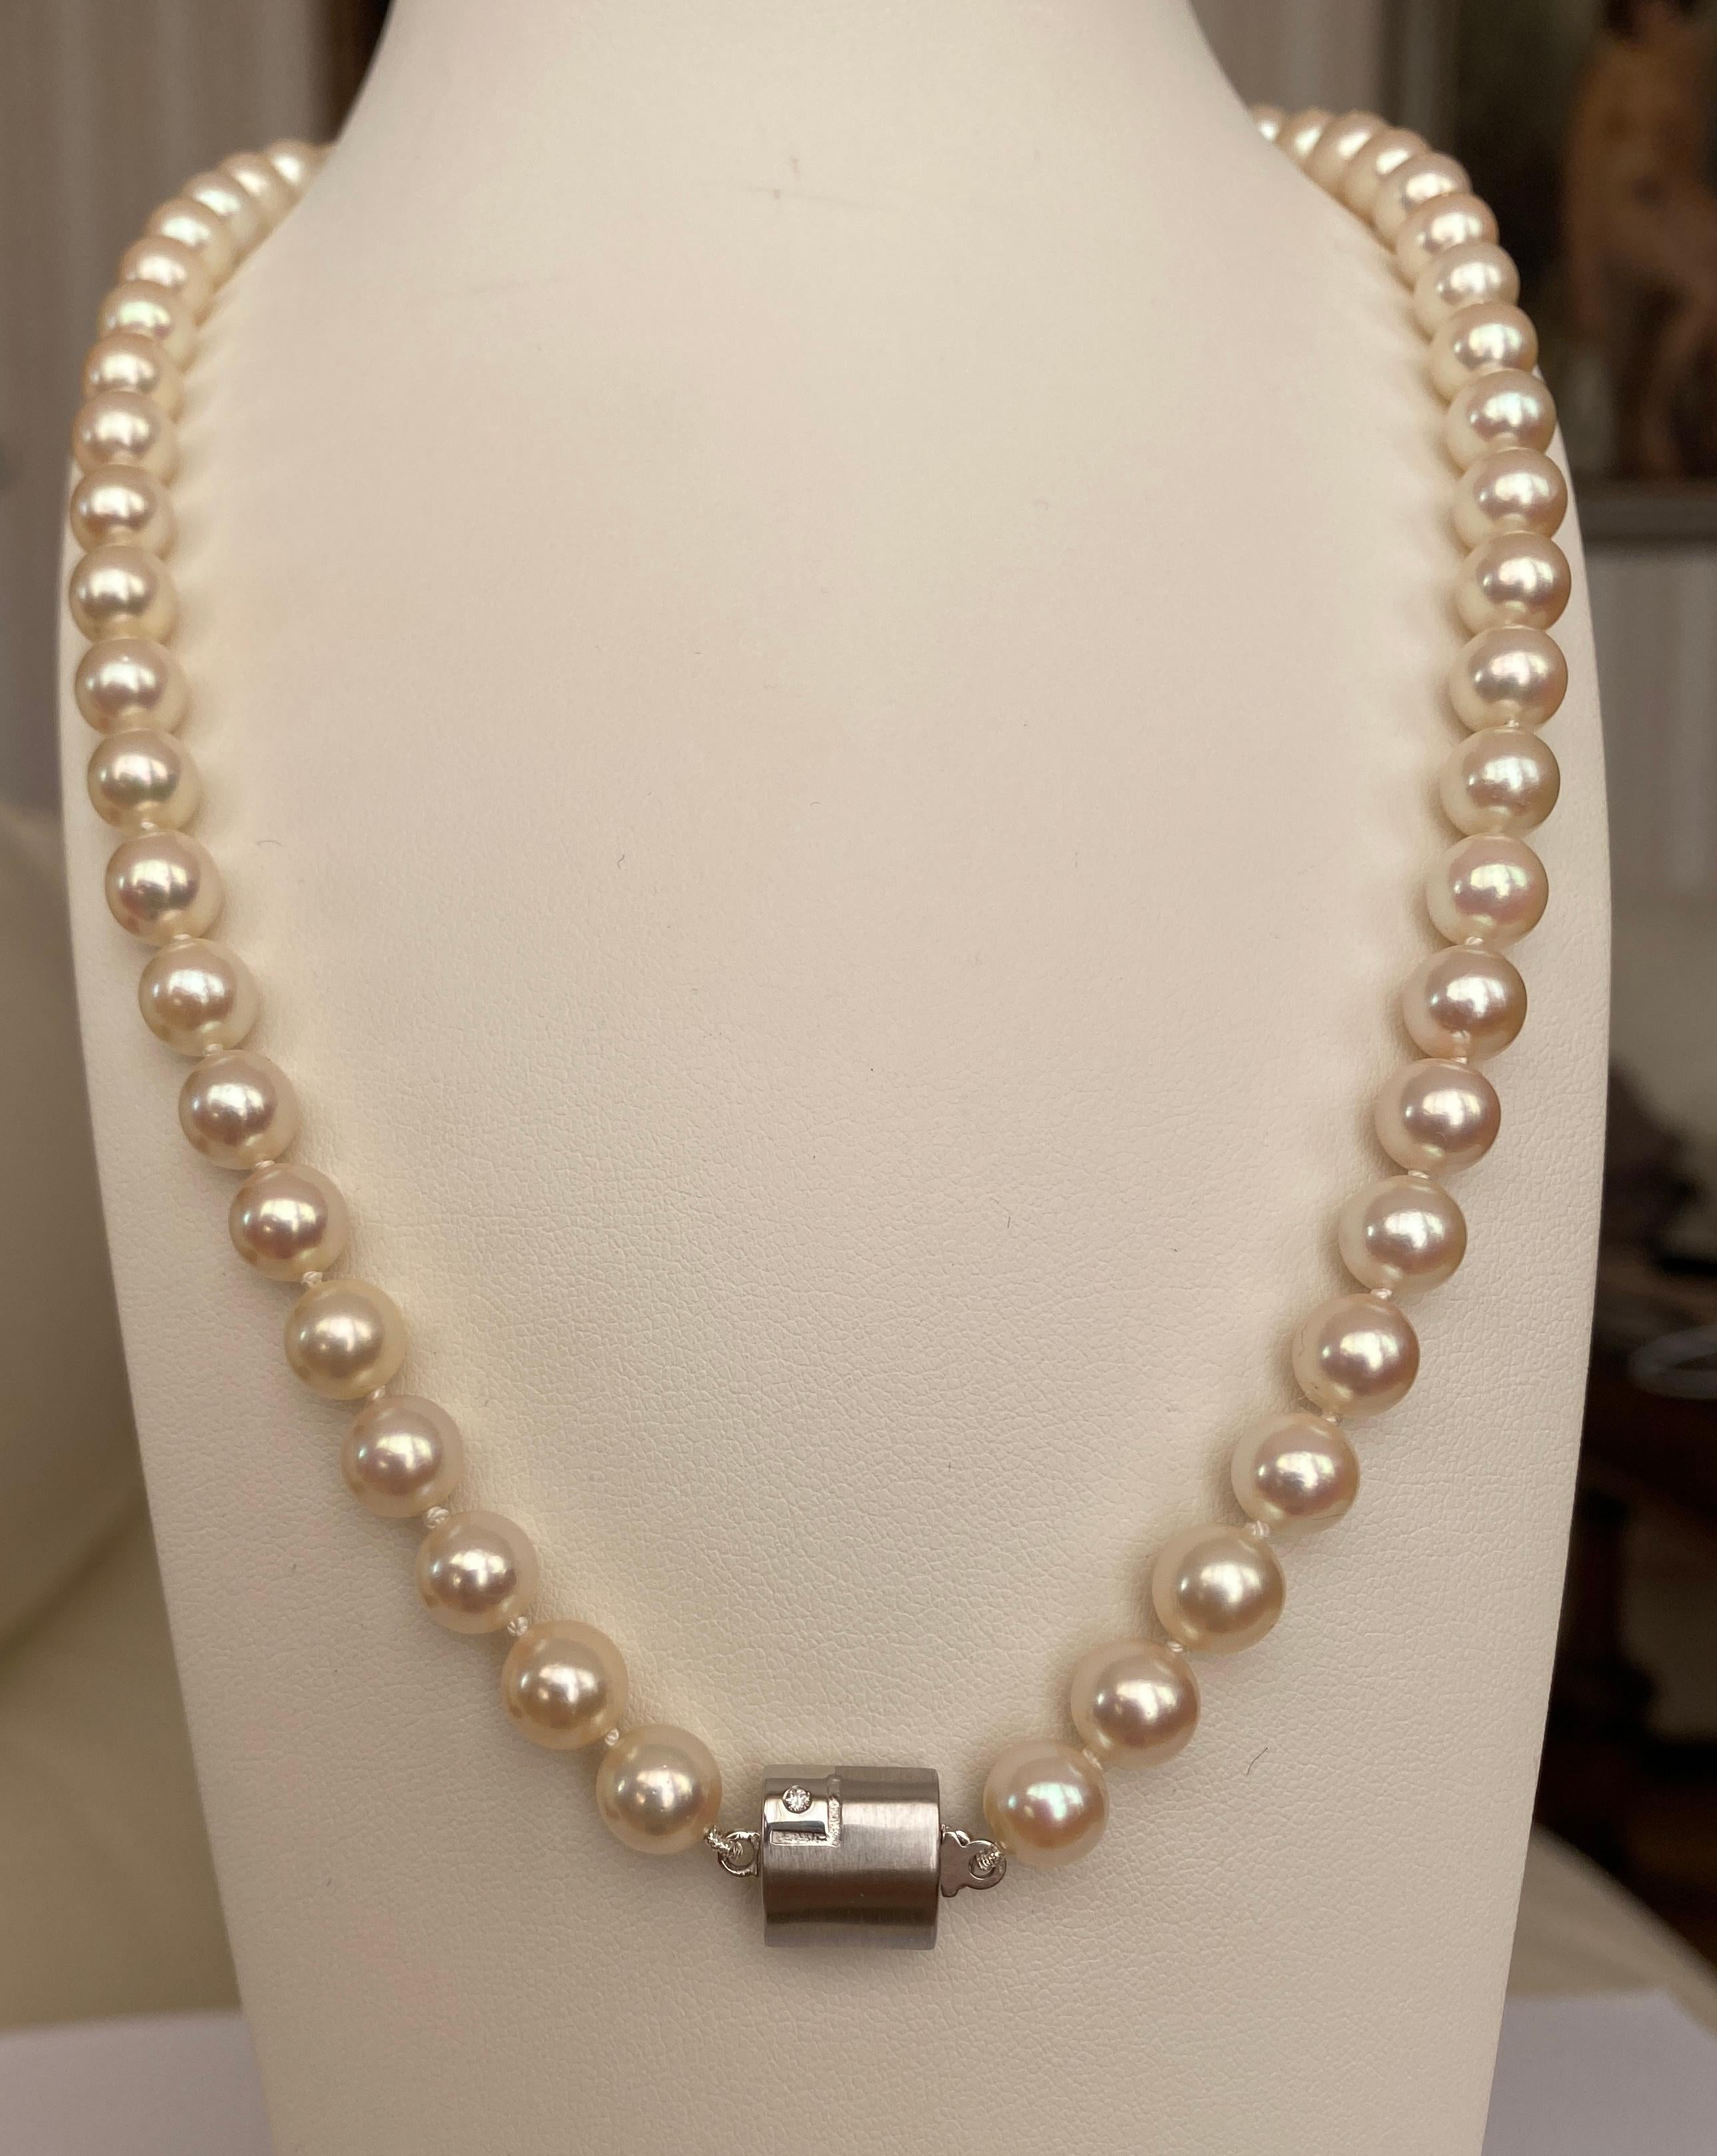 Offered, Akoya pearl necklace with 18 kt white gold clasp, marked with JKA and 750.
Akoya pearls are  56 pieces. Diameter of pearls round 7.50 mm. The gold clasp is decorated with 1 diamond ca 0.02 crt G/VS.
Length: 47 cm
Gross weight:39 grams
Gold